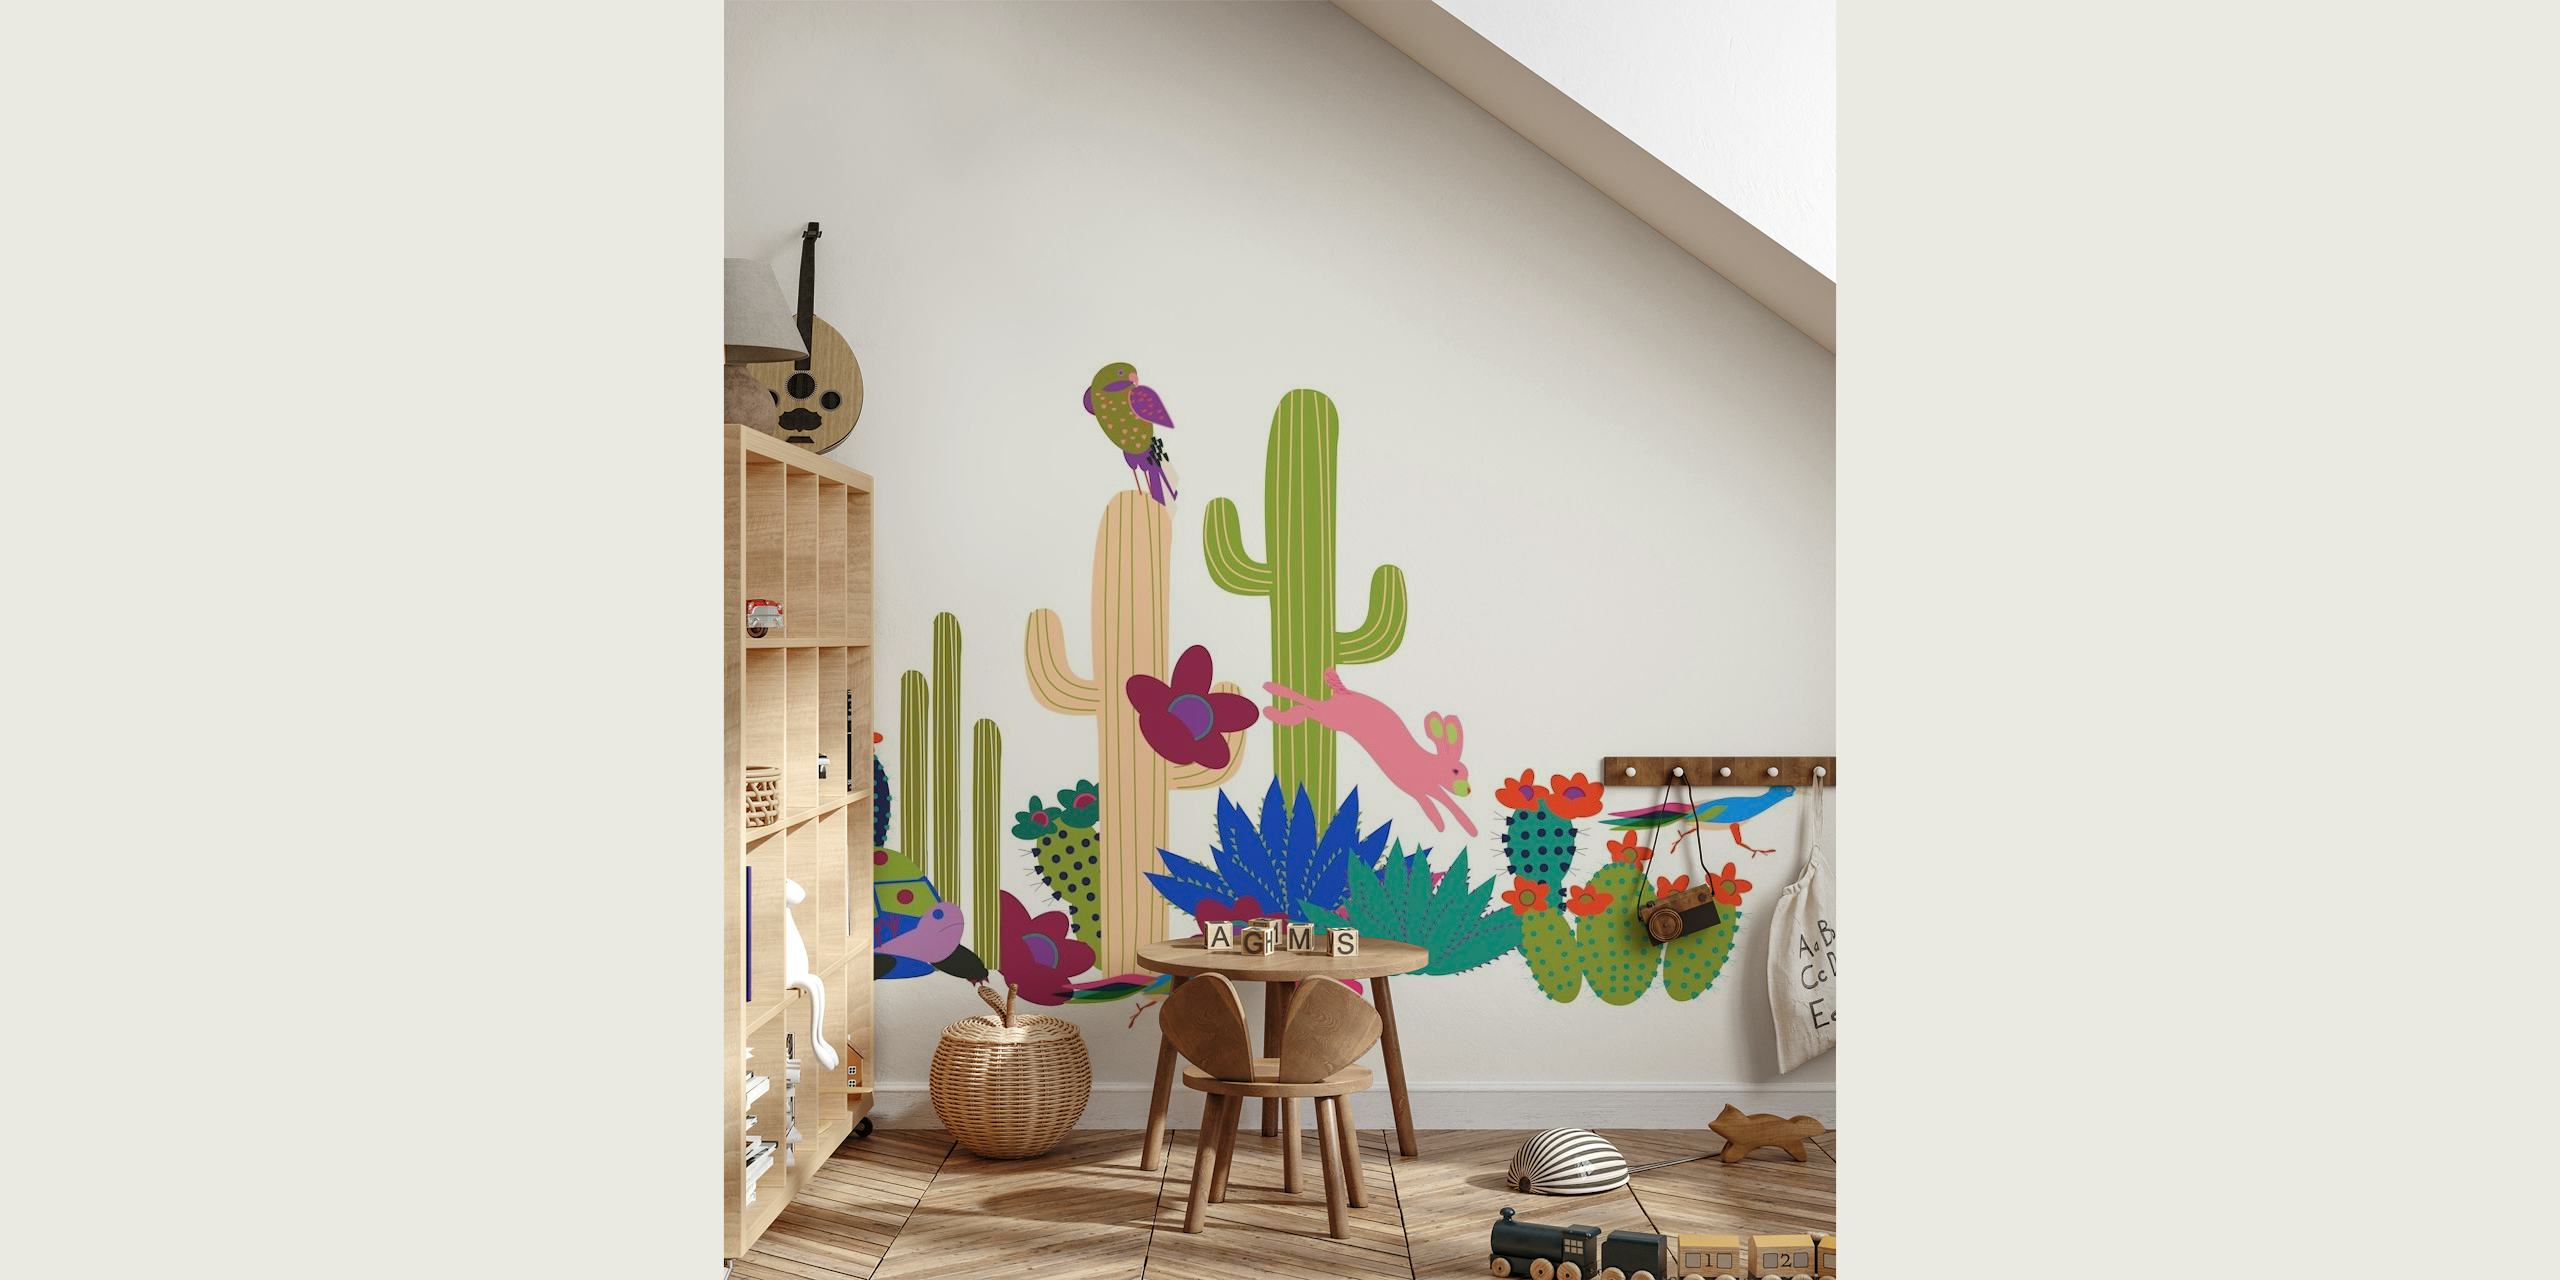 Colorful, animated desert scene with assorted cacti and desert plants on a wall mural